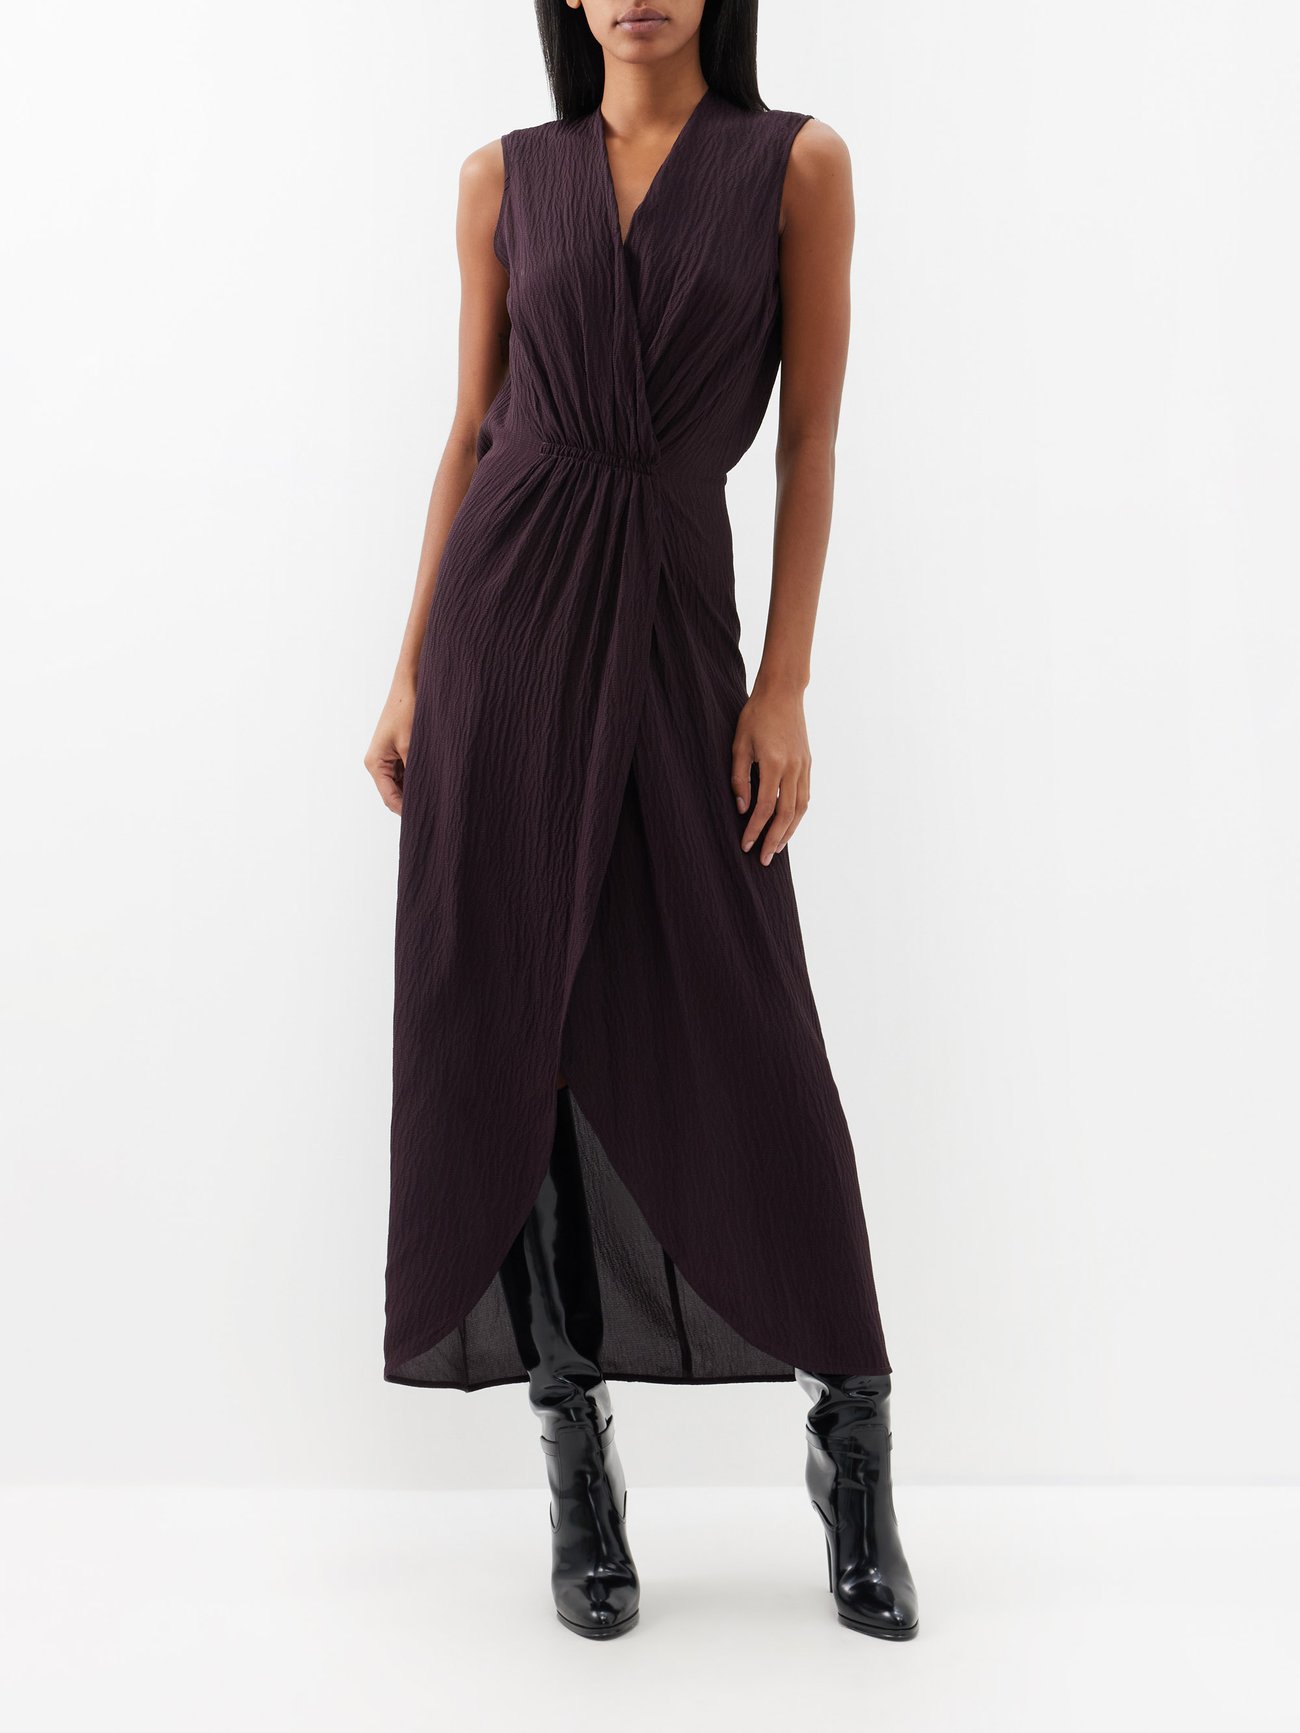 Raey cuts this burgundy dress from textured washed silk to an elegant silhouette that’s gathered at the waist before falling to a front-slit hem.